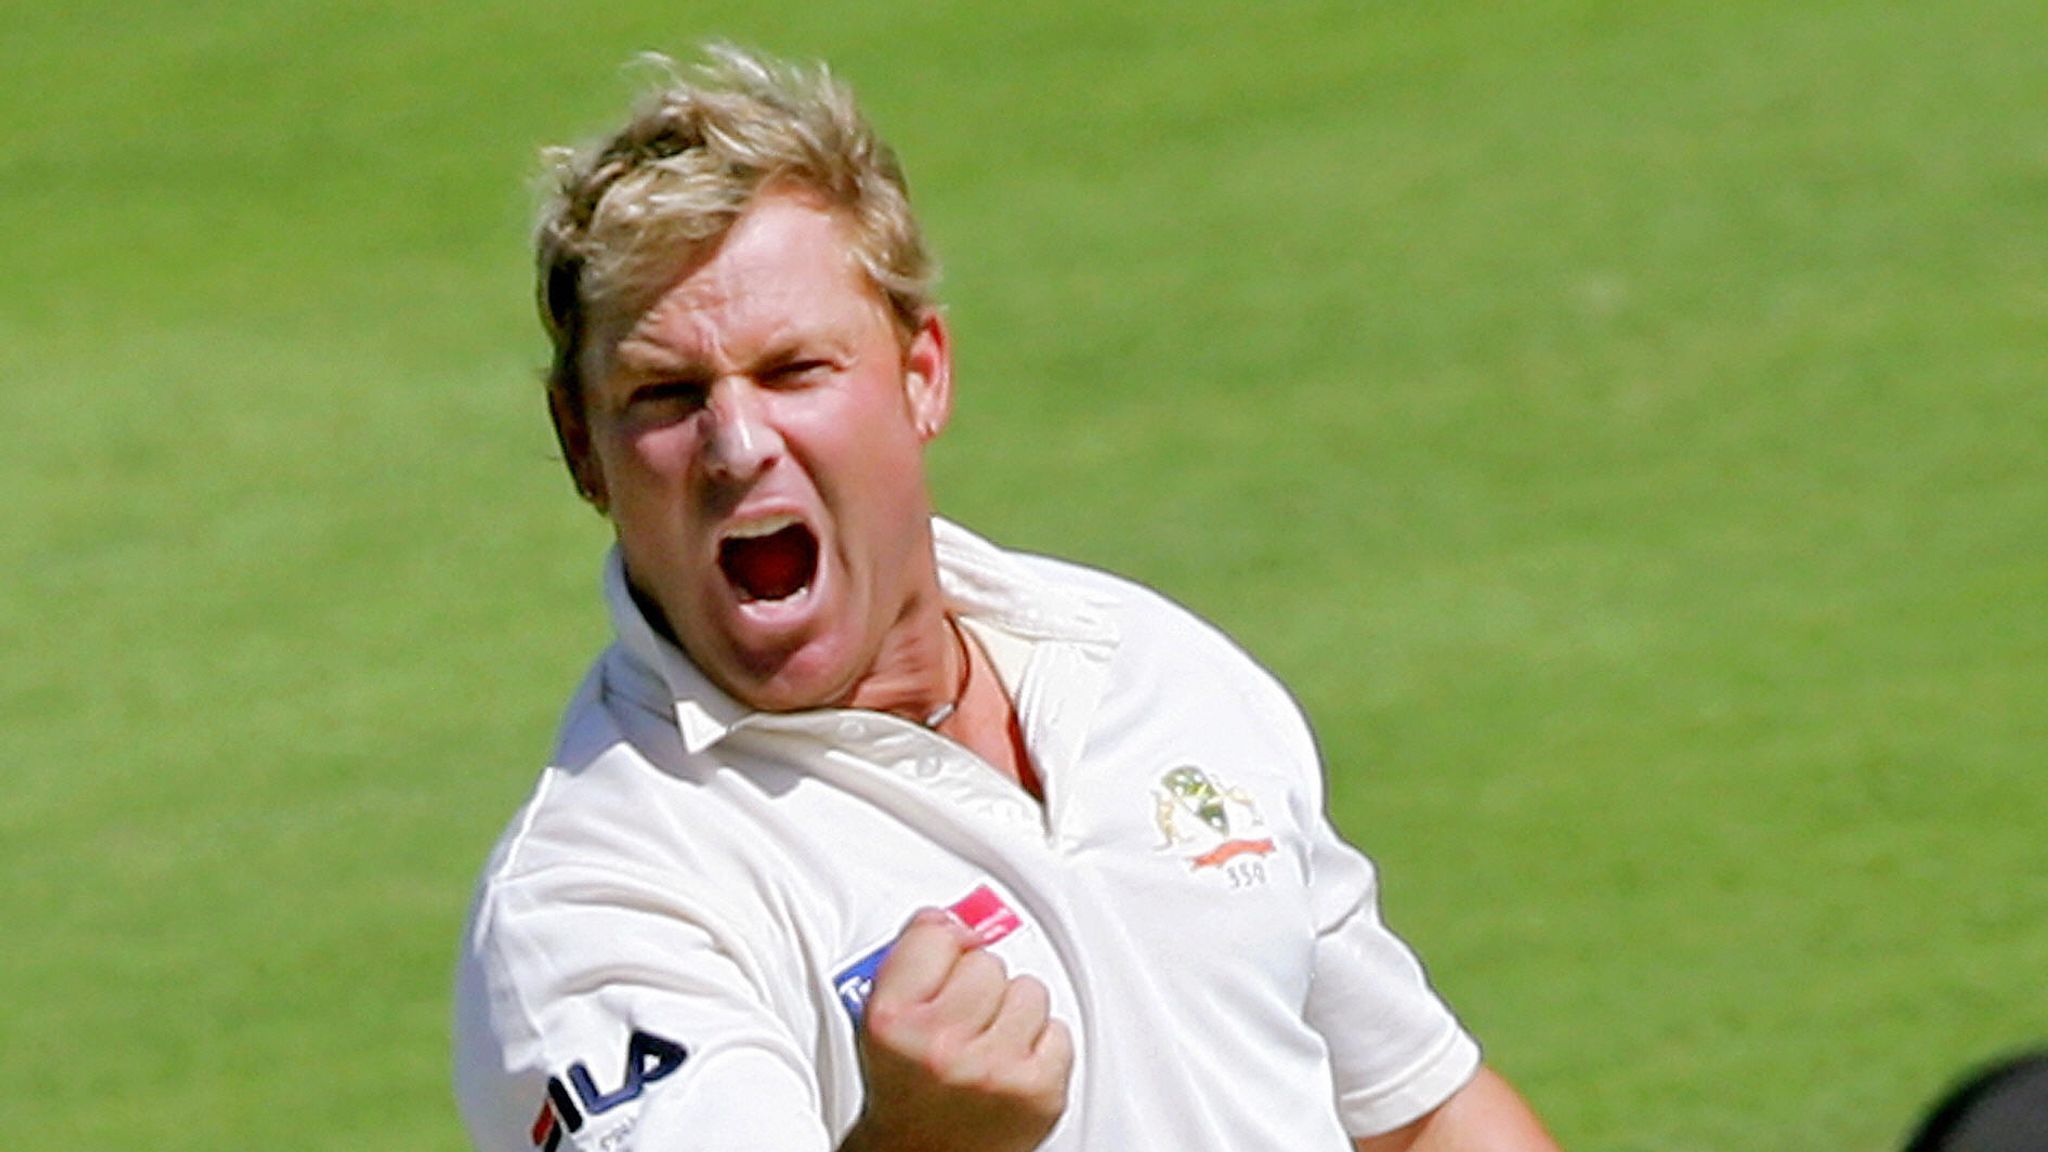 Shane Warne offers tips and advice in our latest coaching clinic | Cricket  News | Sky Sports